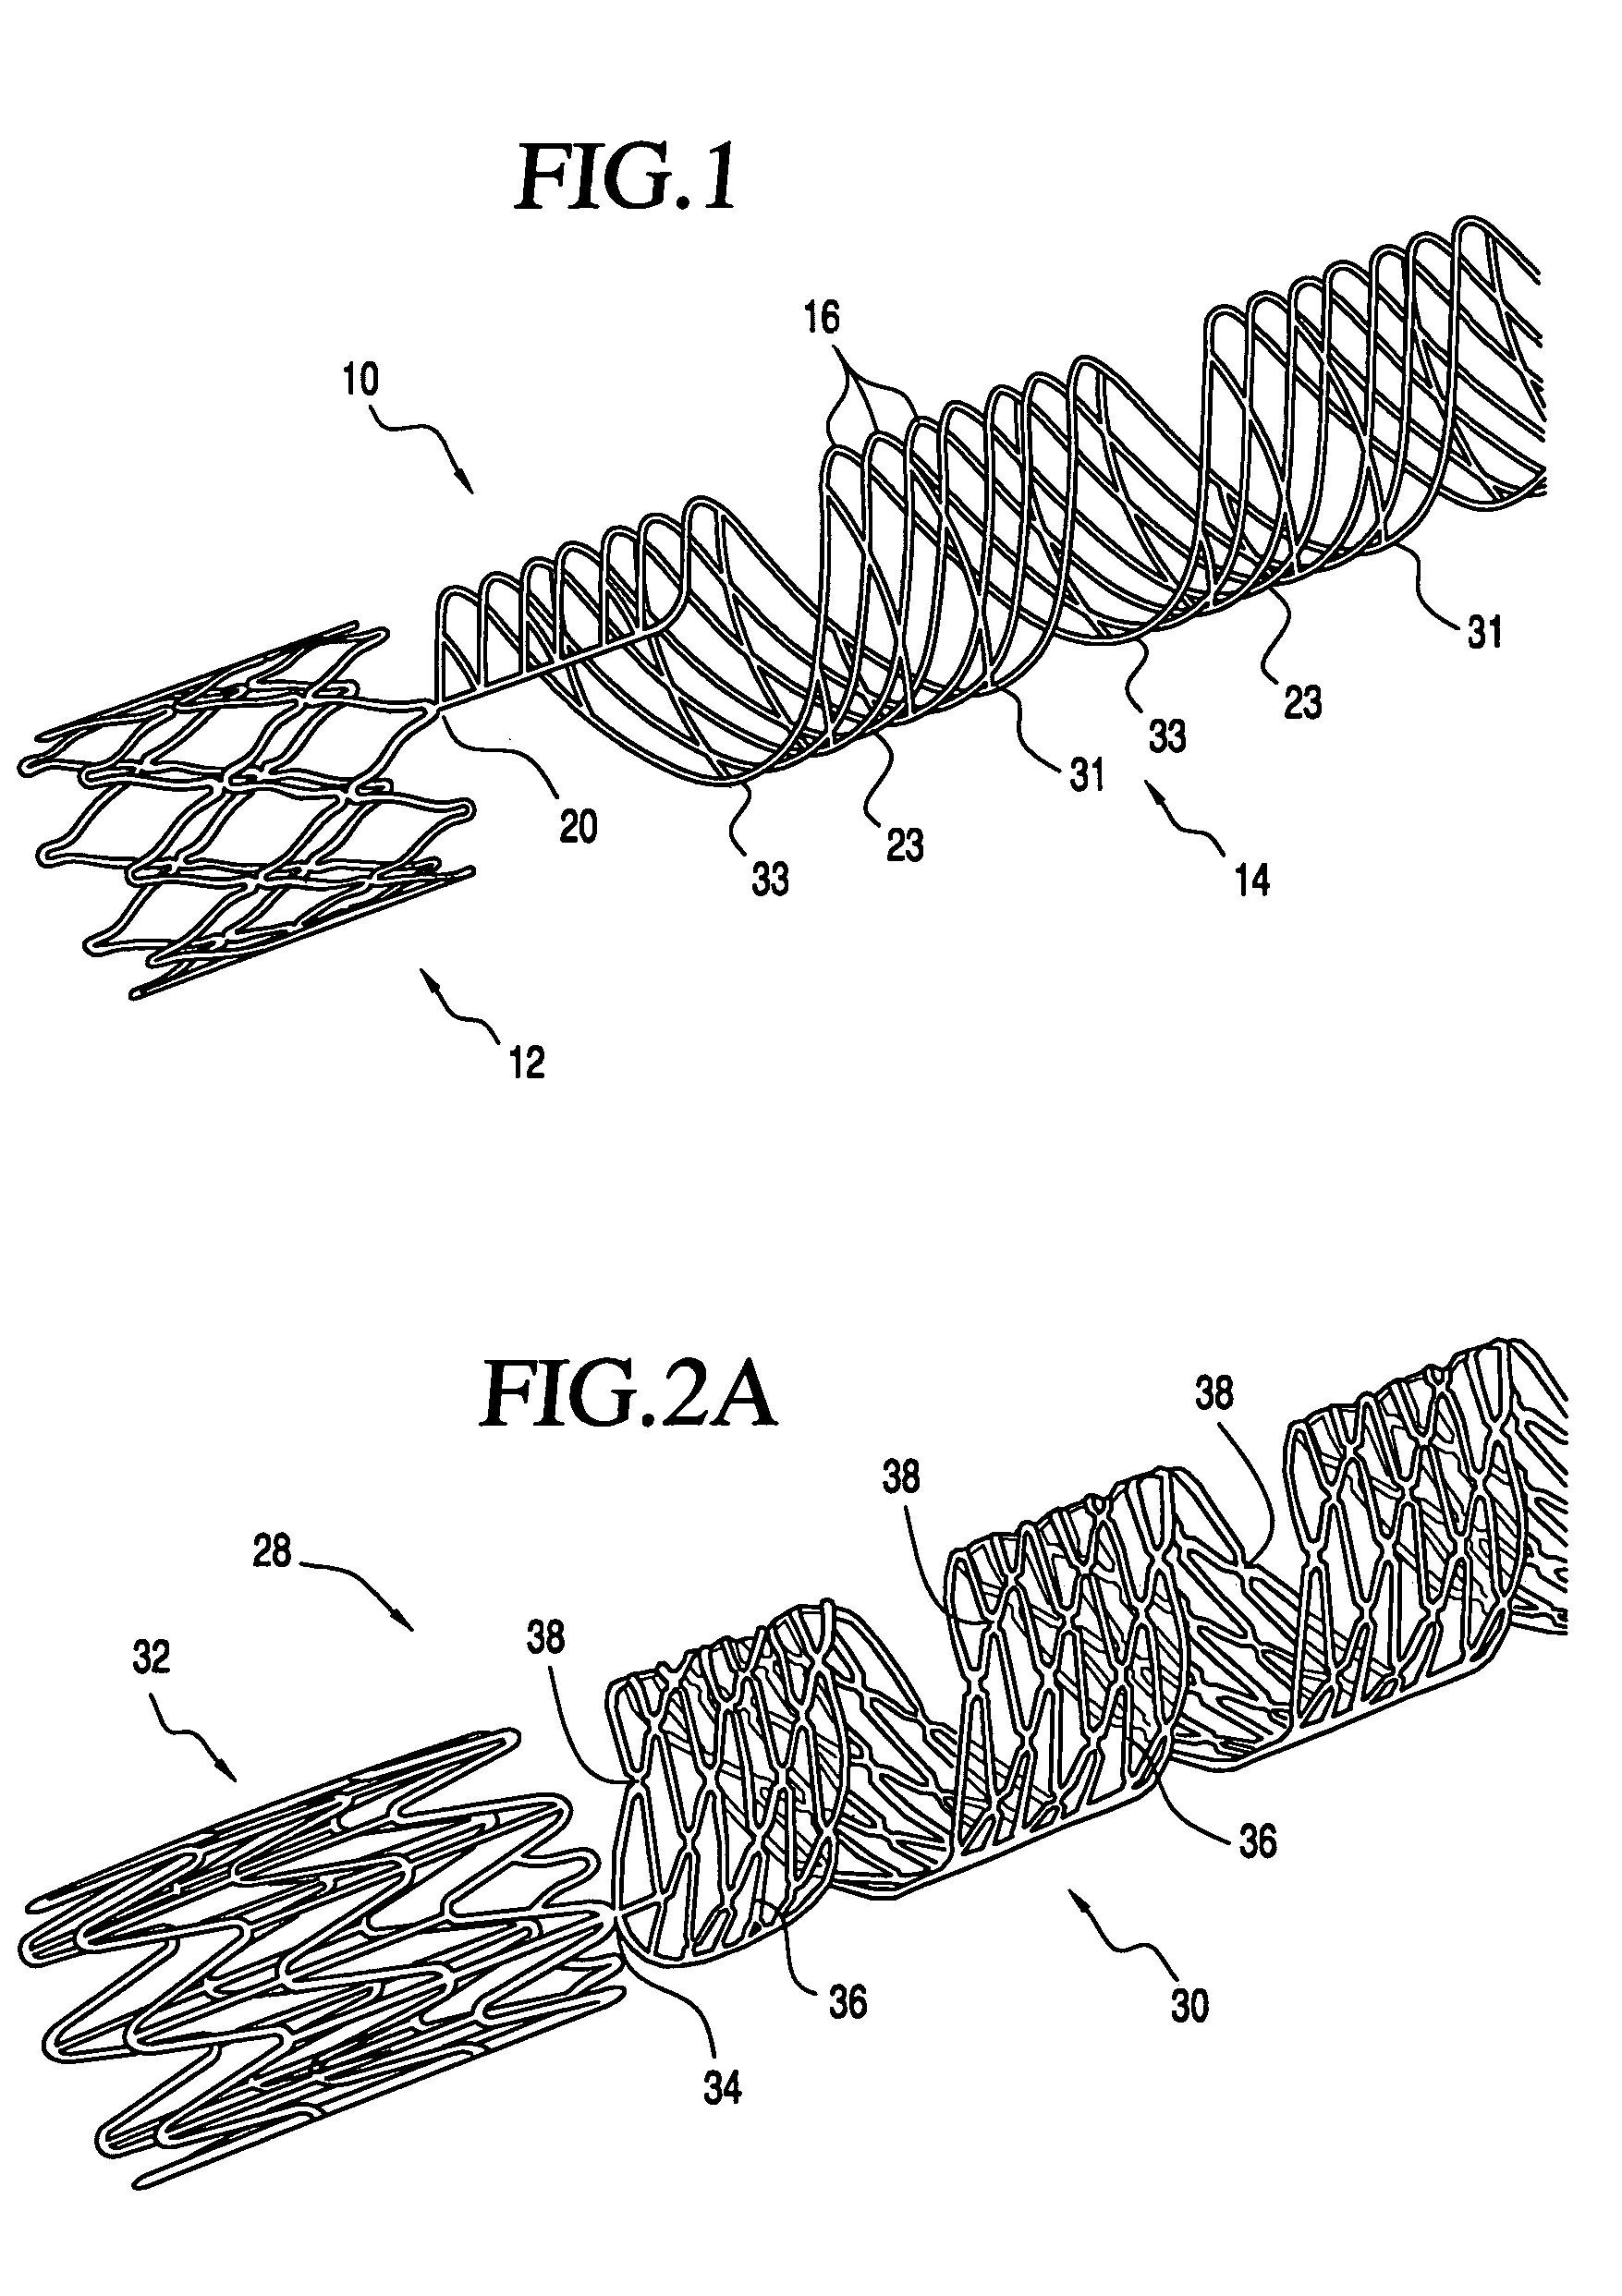 Vascular prosthesis having improved flexibility and nested cell delivery configuration